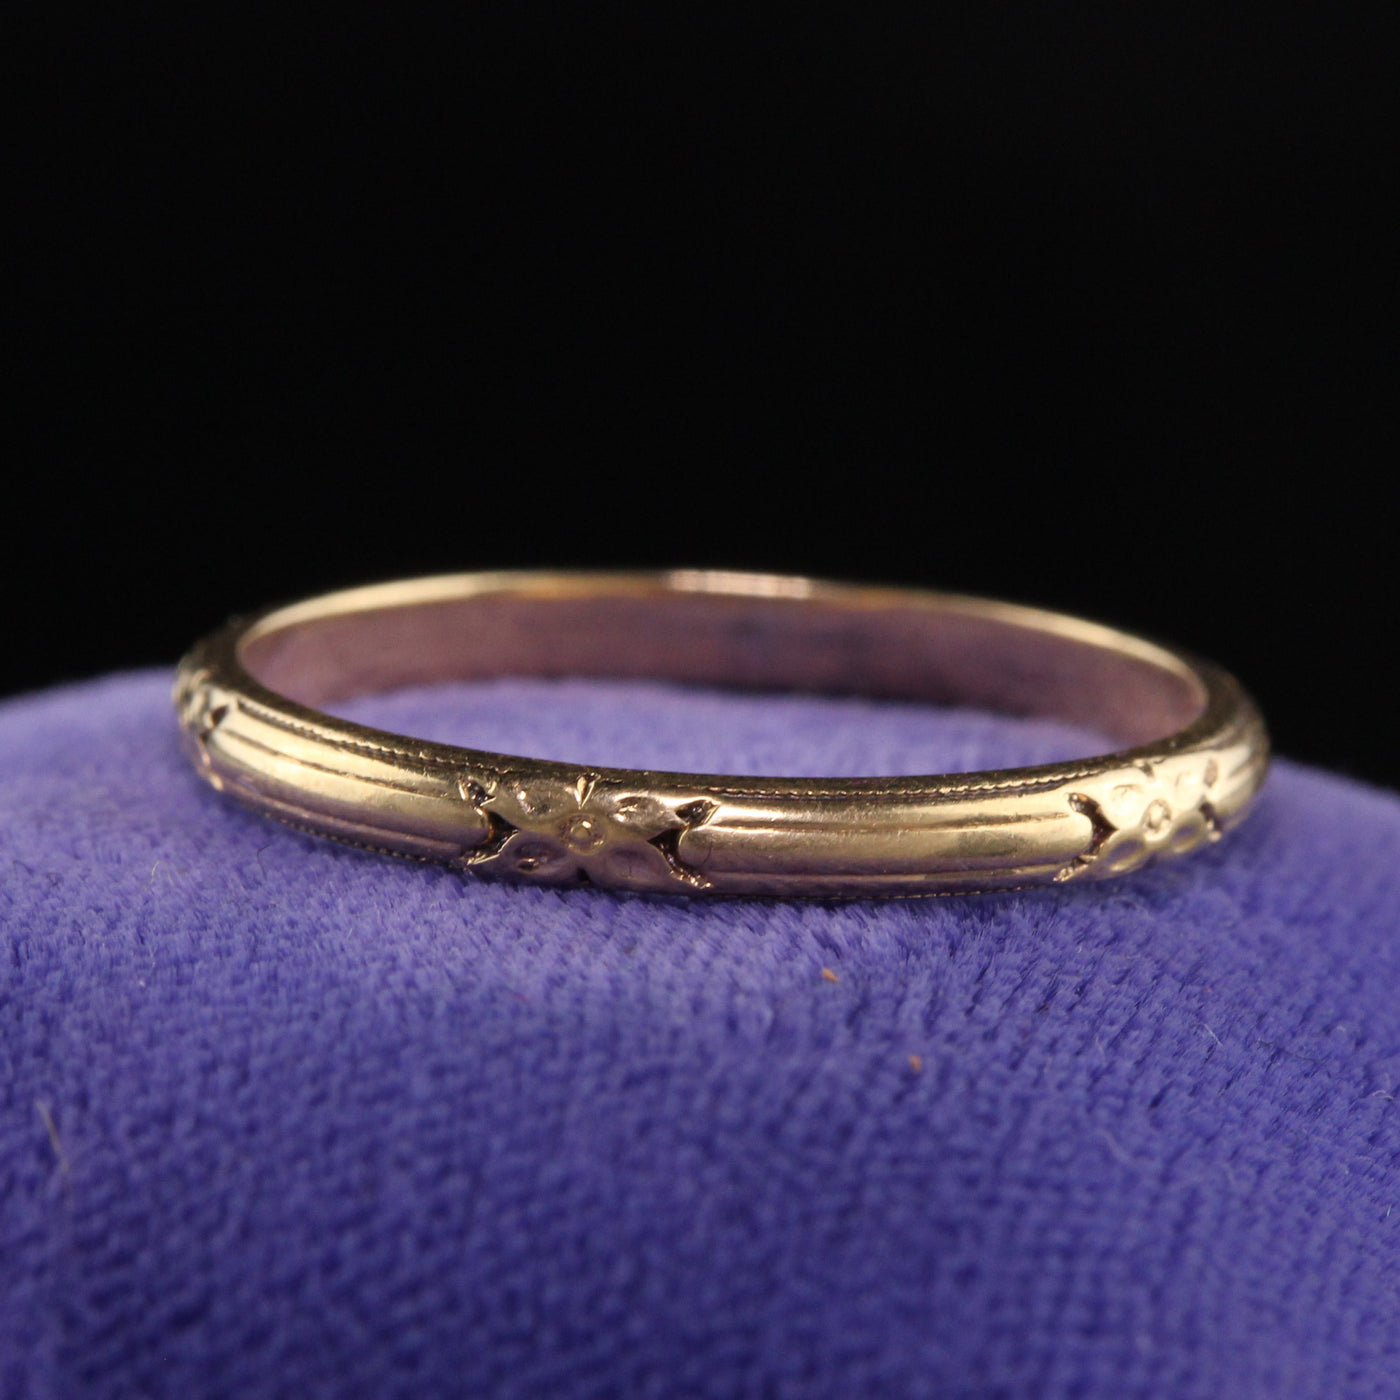 Antique Art Deco 14K Yellow Gold Engraved Wedding Band - Size 5 1/4